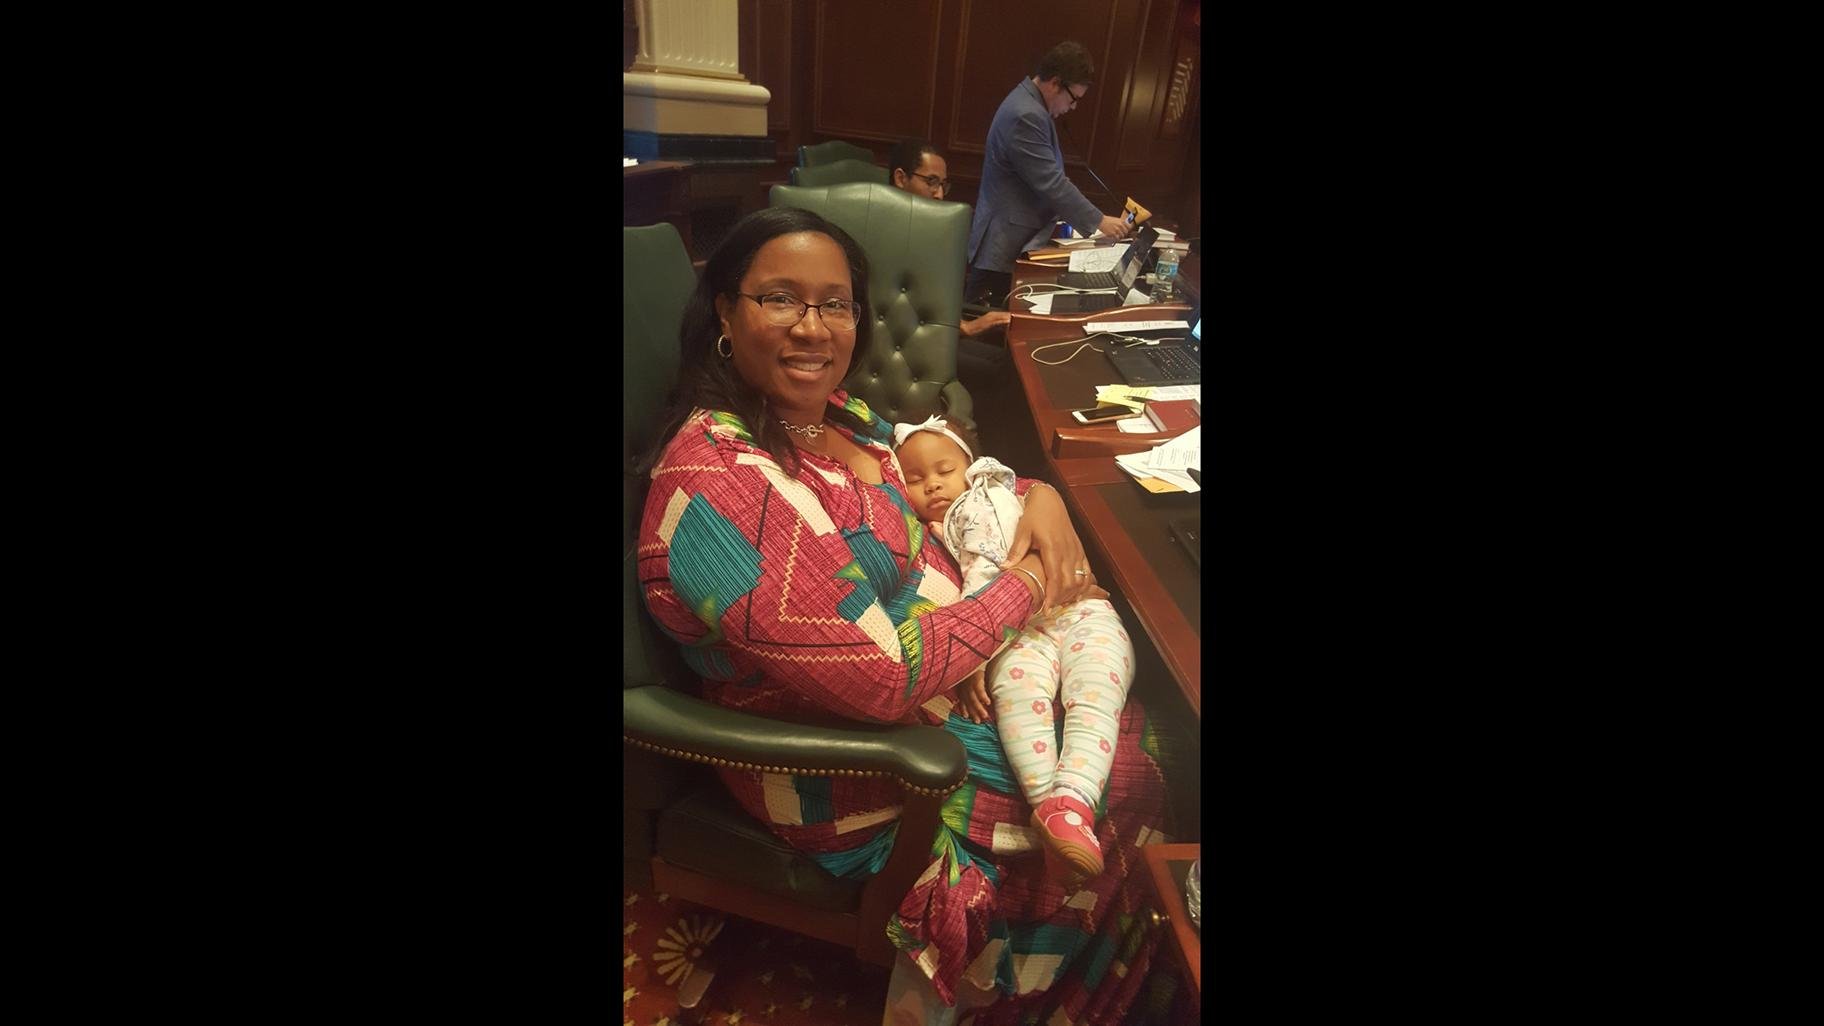 When now-Chicago Treasurer Melissa Conyears-Ervin was a state representative for the 10th District in 2017, her daughter was six months old, and there was nowhere for her to nurse at the Capitol in Springfield. (Courtesy Melissa Conyears-Ervin)